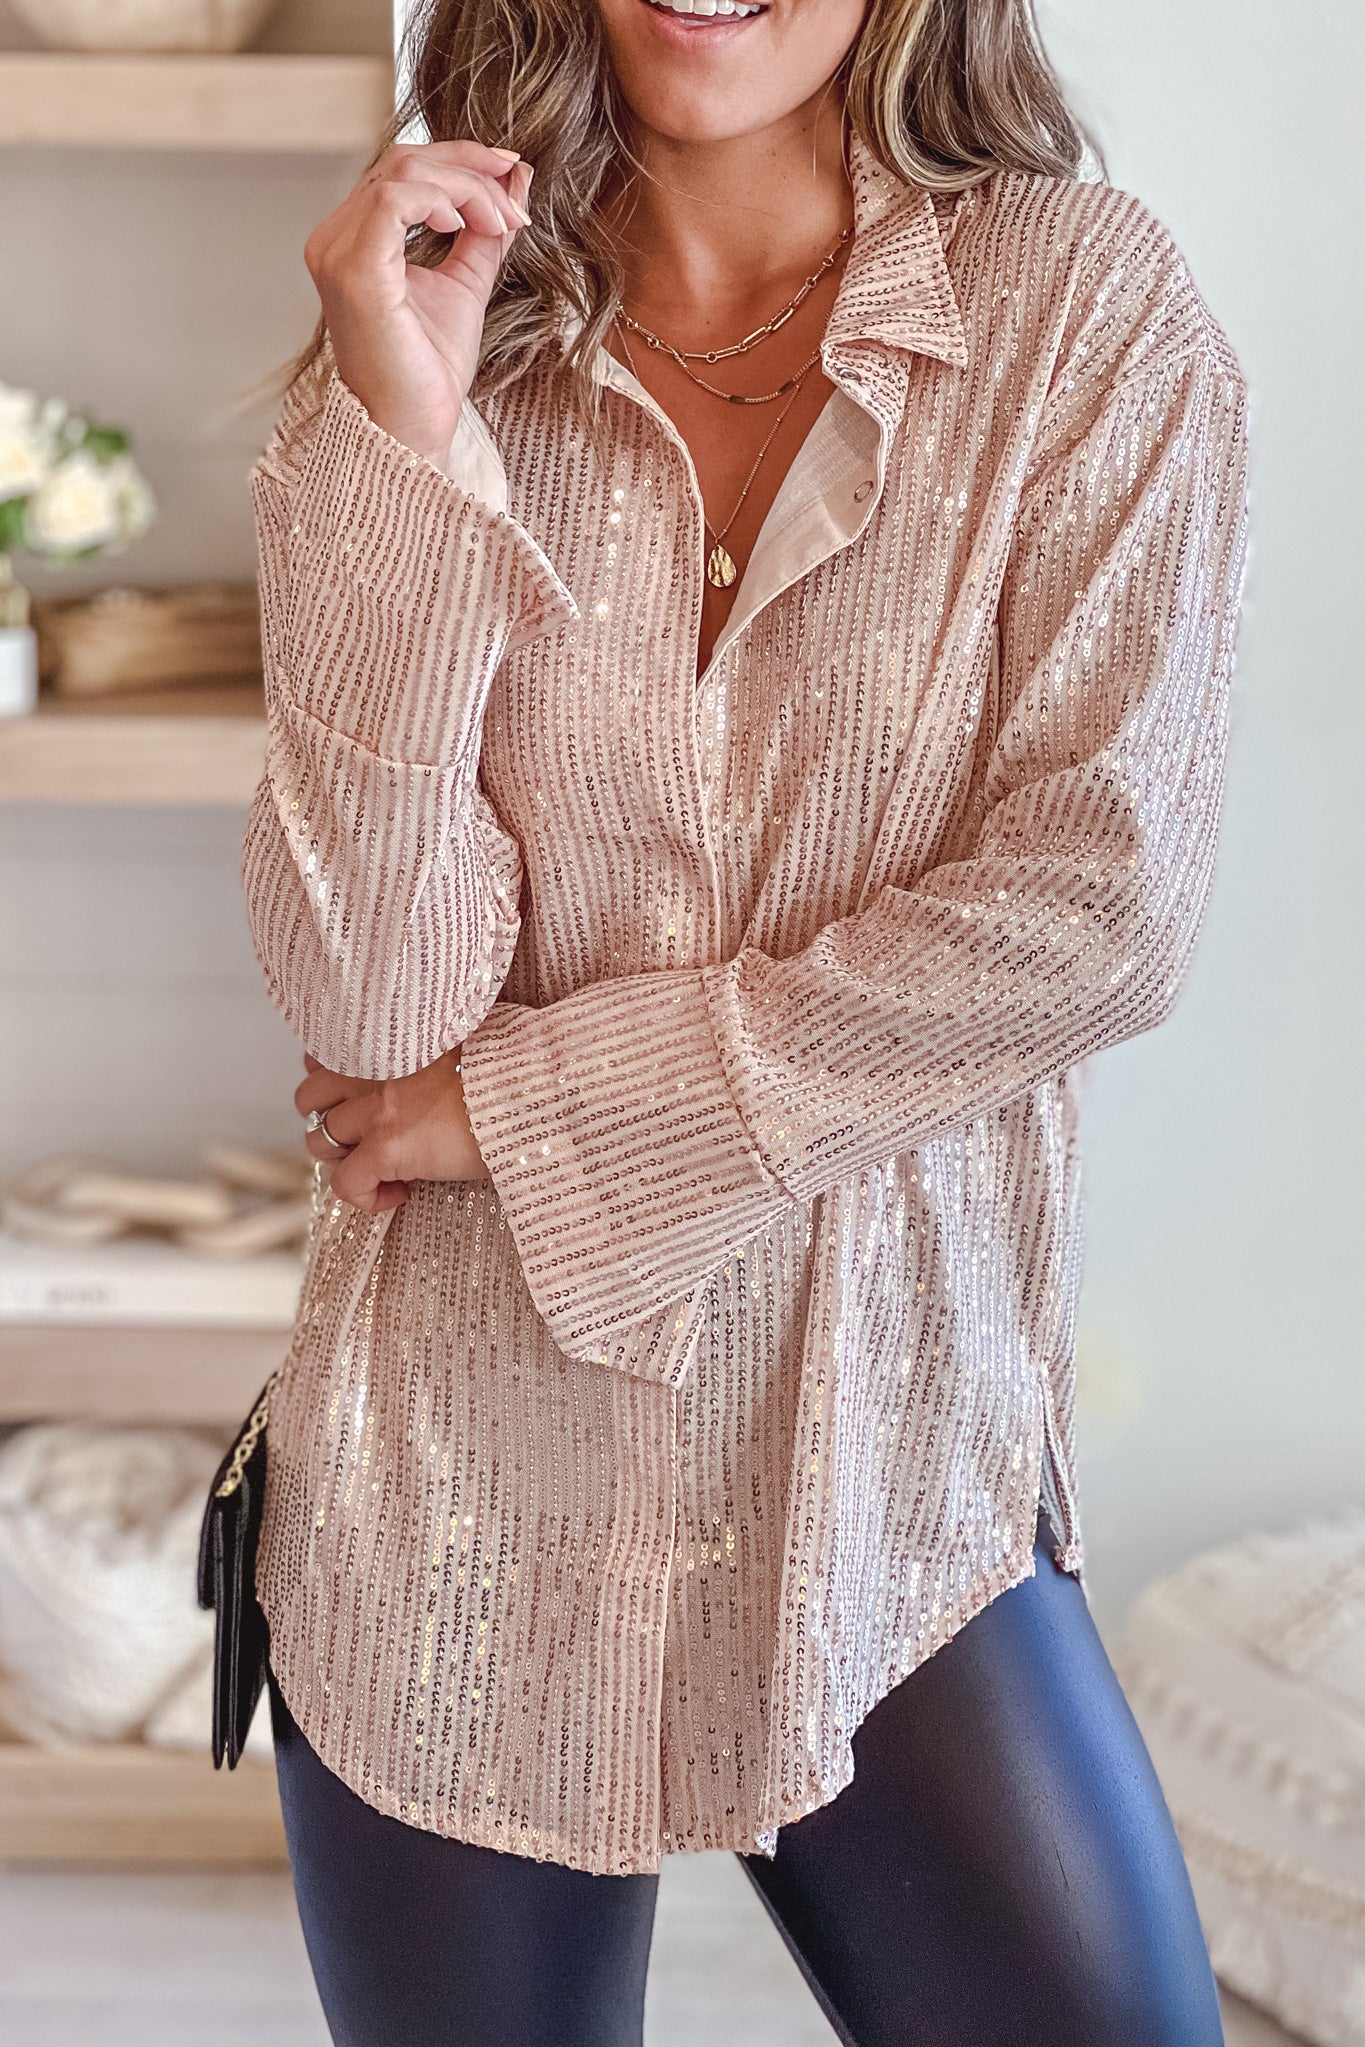 Rose Gold Sequin Long Sleeve Top